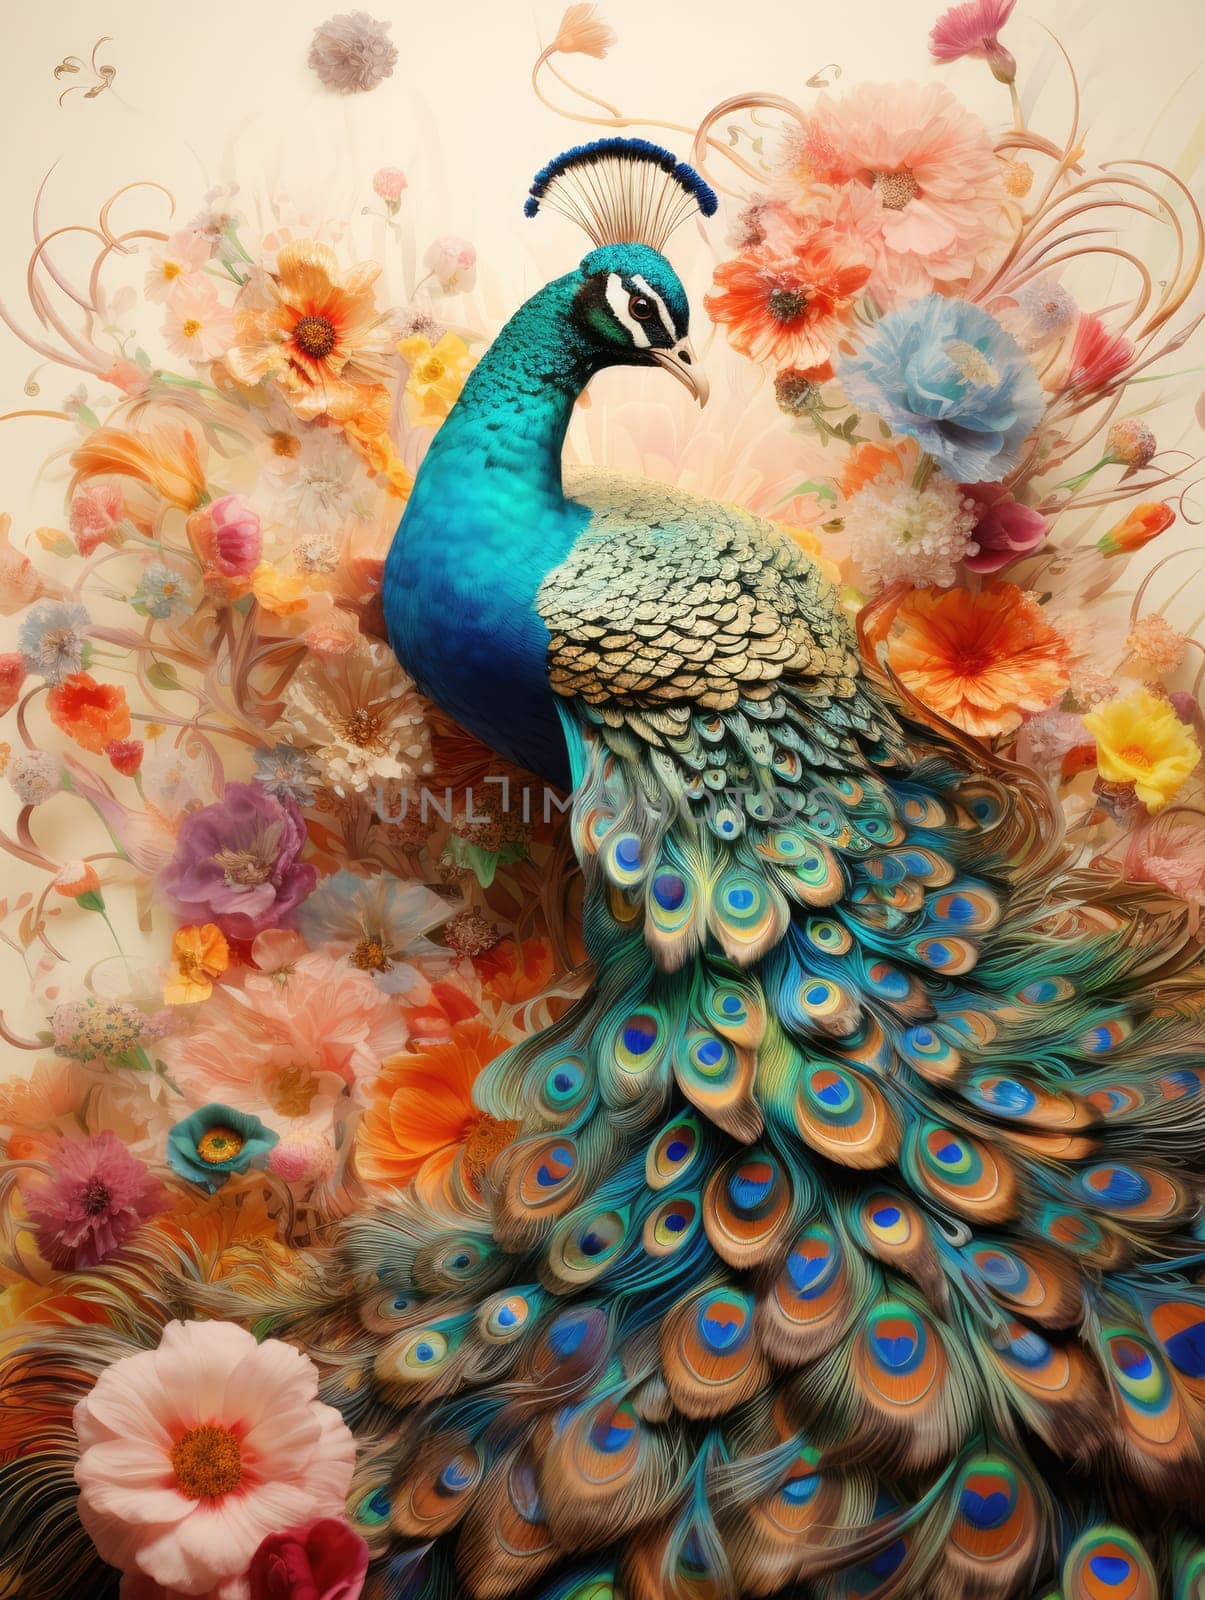 A beautiful colourful peacock among the flowers in the garden